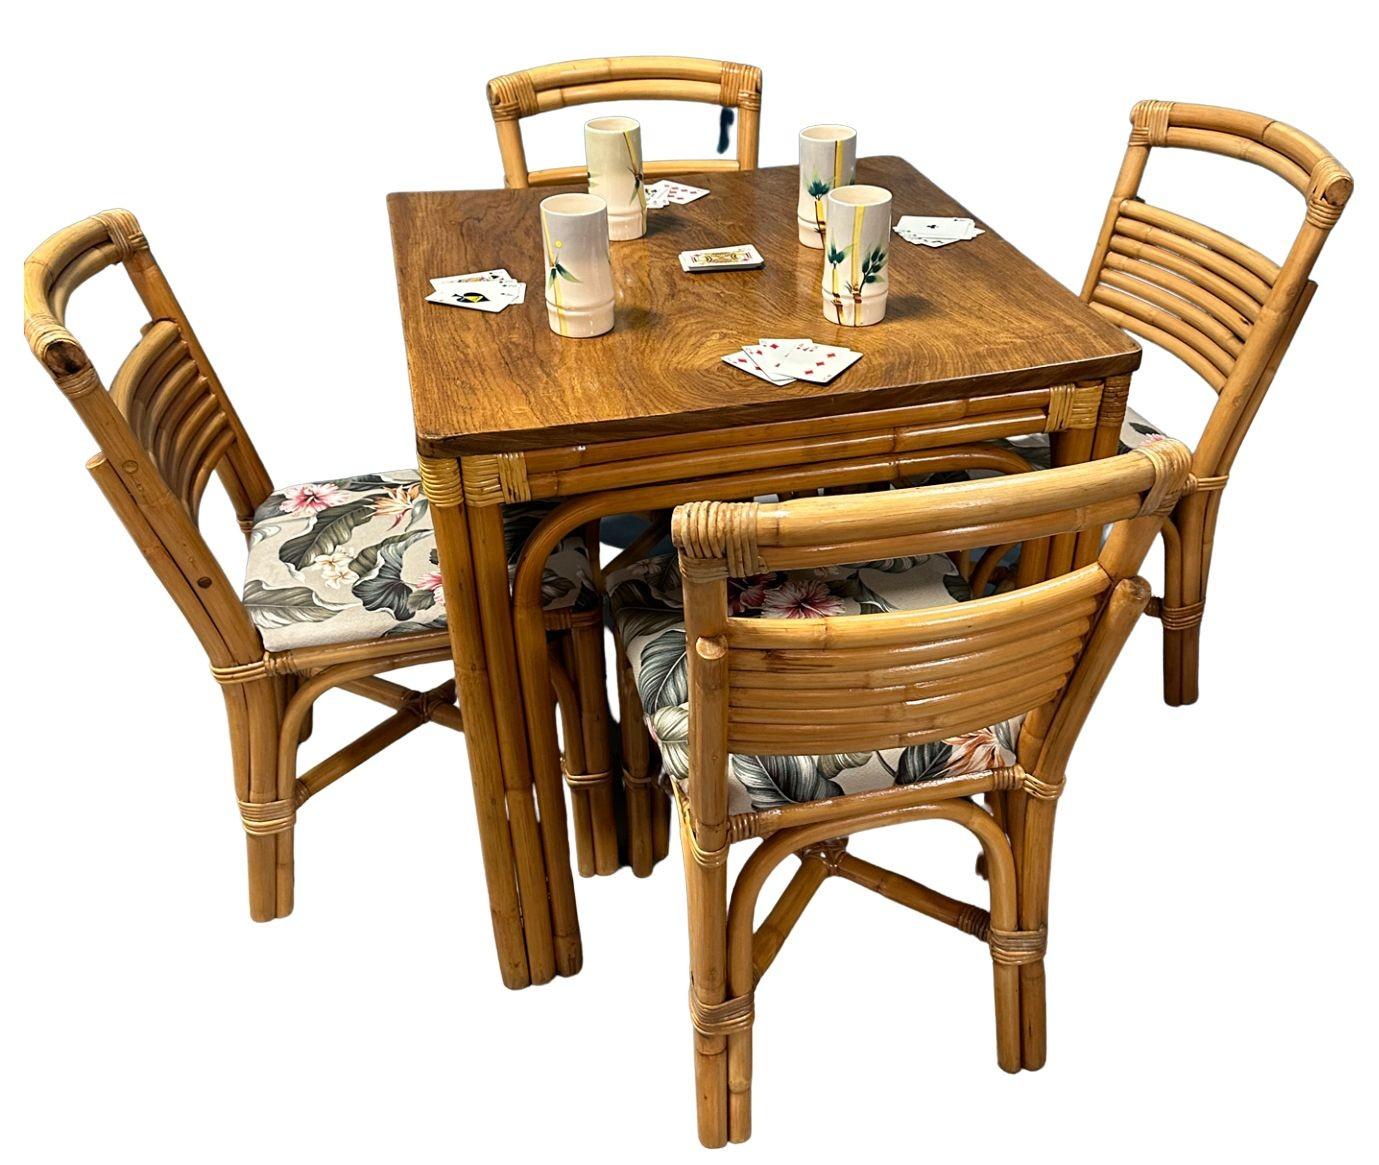 Restored rattan dining set featuring a square rattan table with beautiful side wrappings and five-strand legs and a set of four stacked strand rattan chairs.

Restored Mid-Century era four-person rattan dining table with five pole rattan legs and a